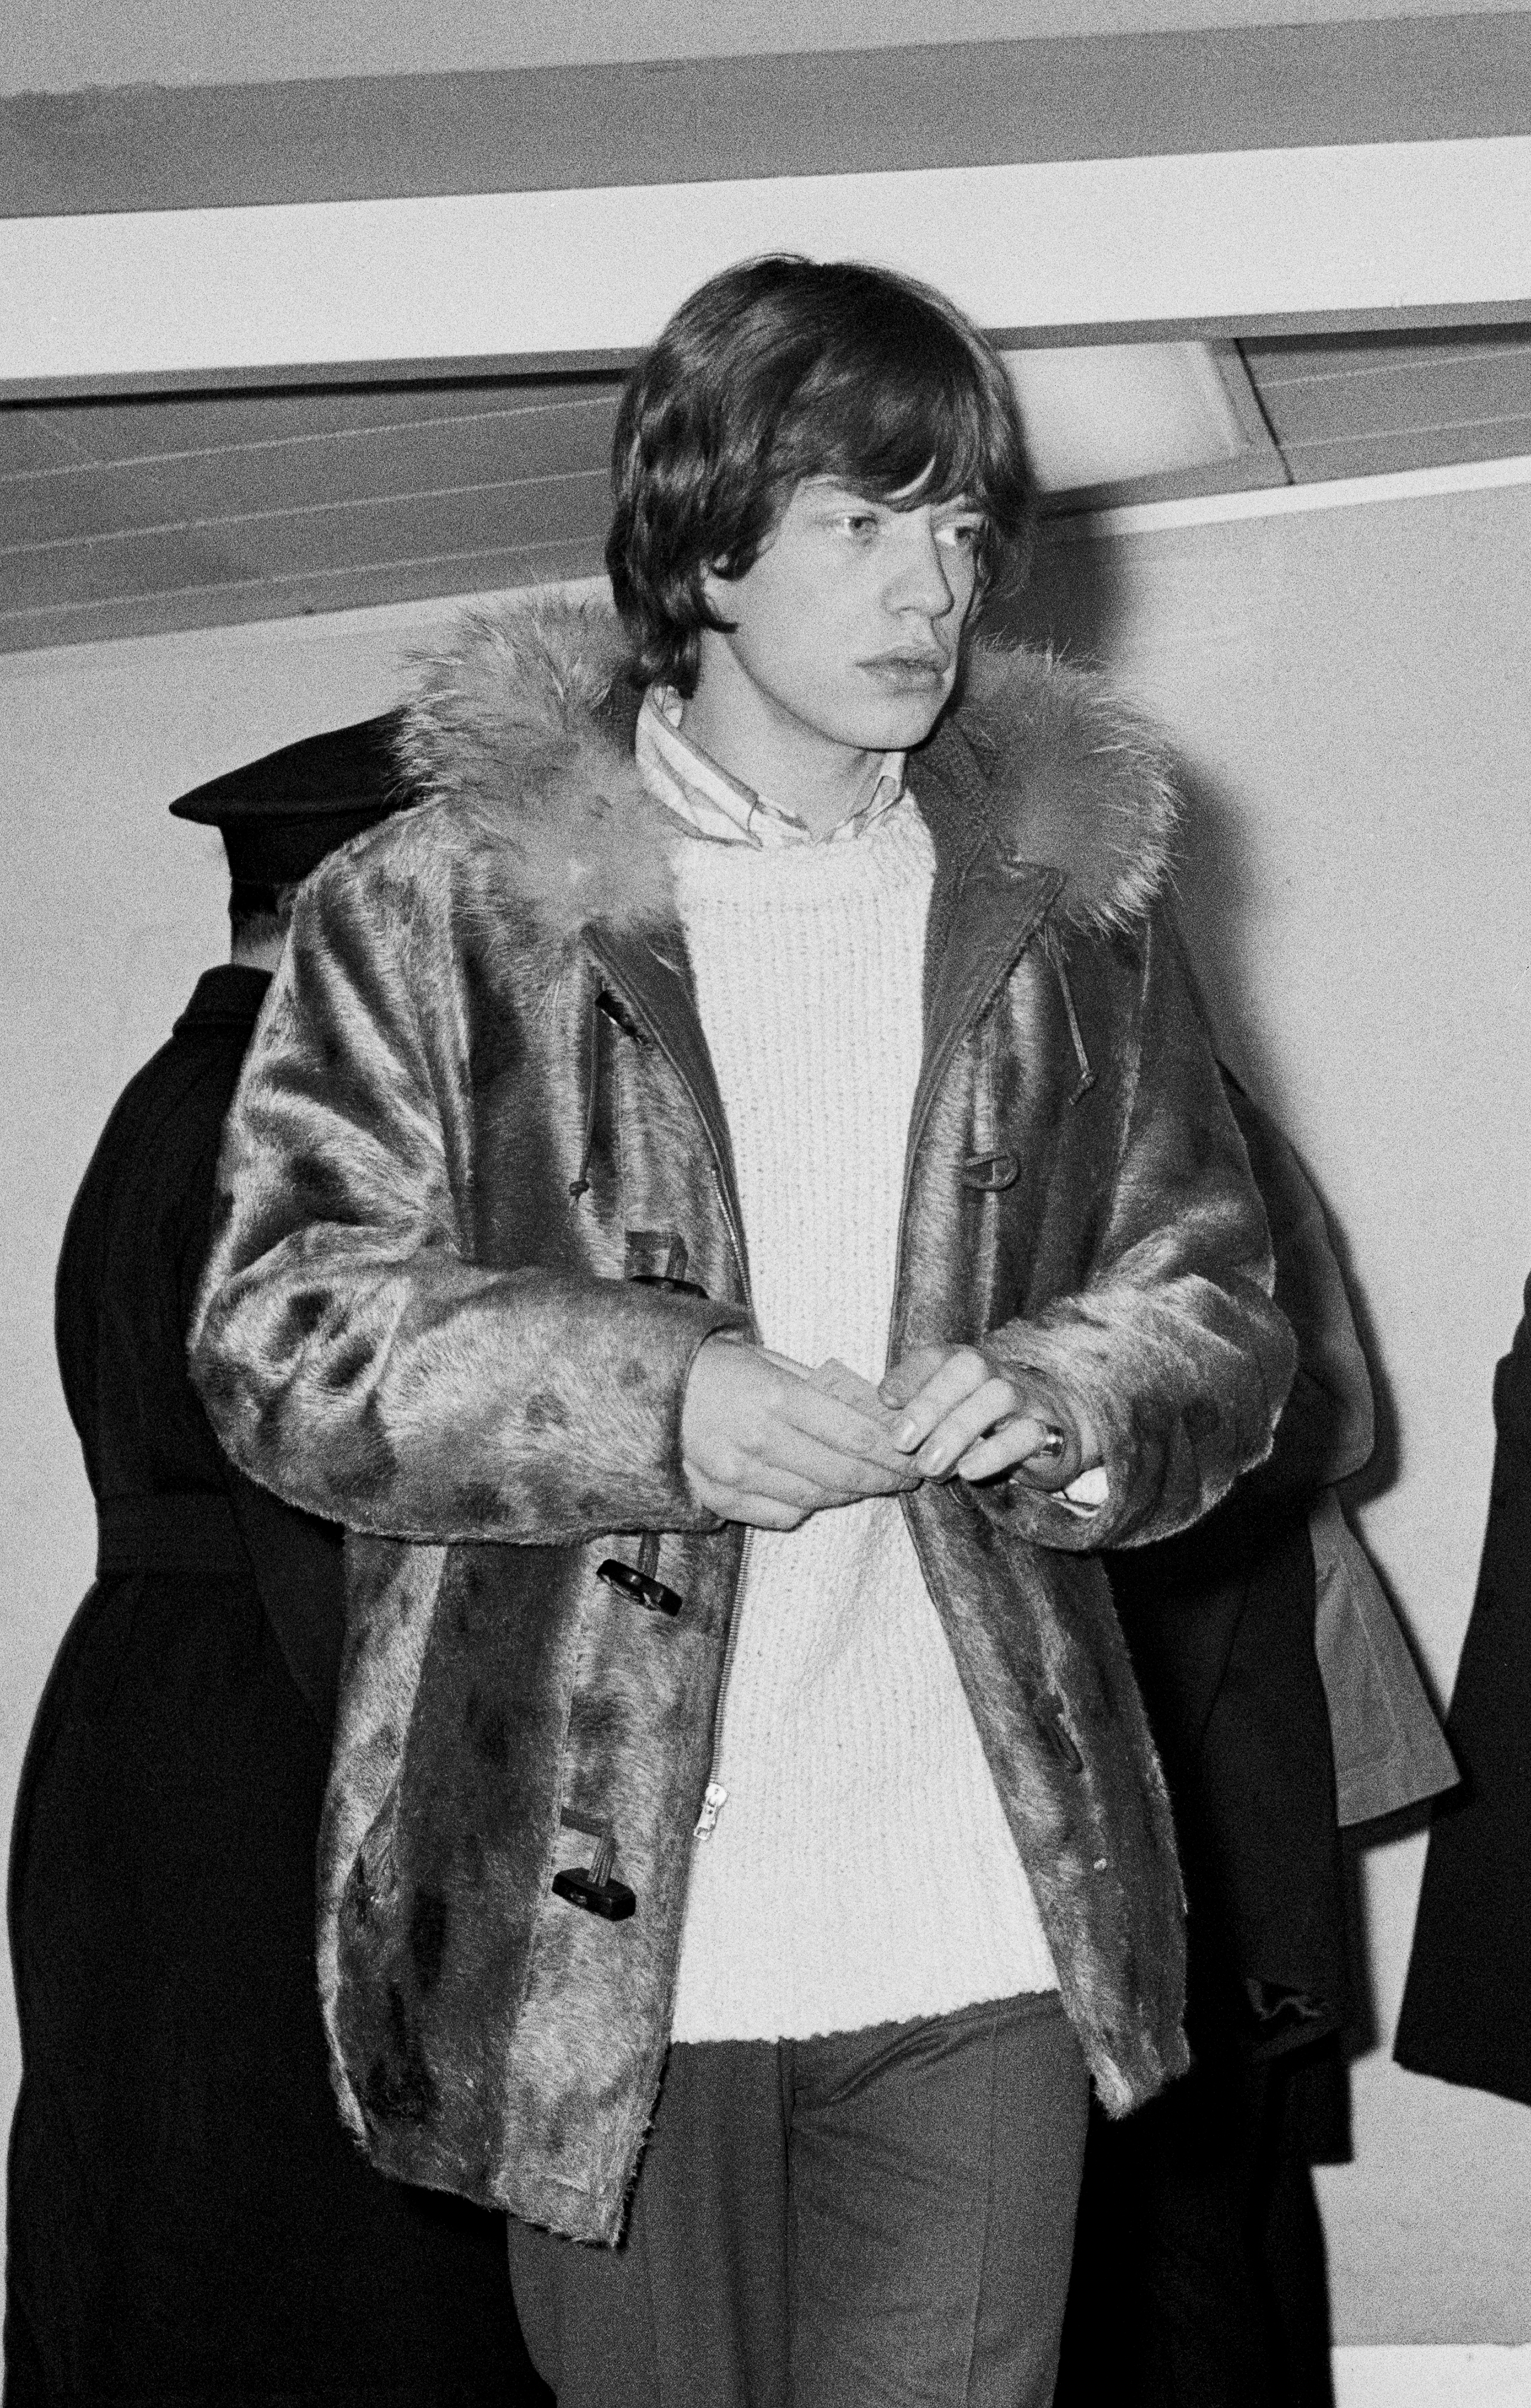 In a jacket with furry collar